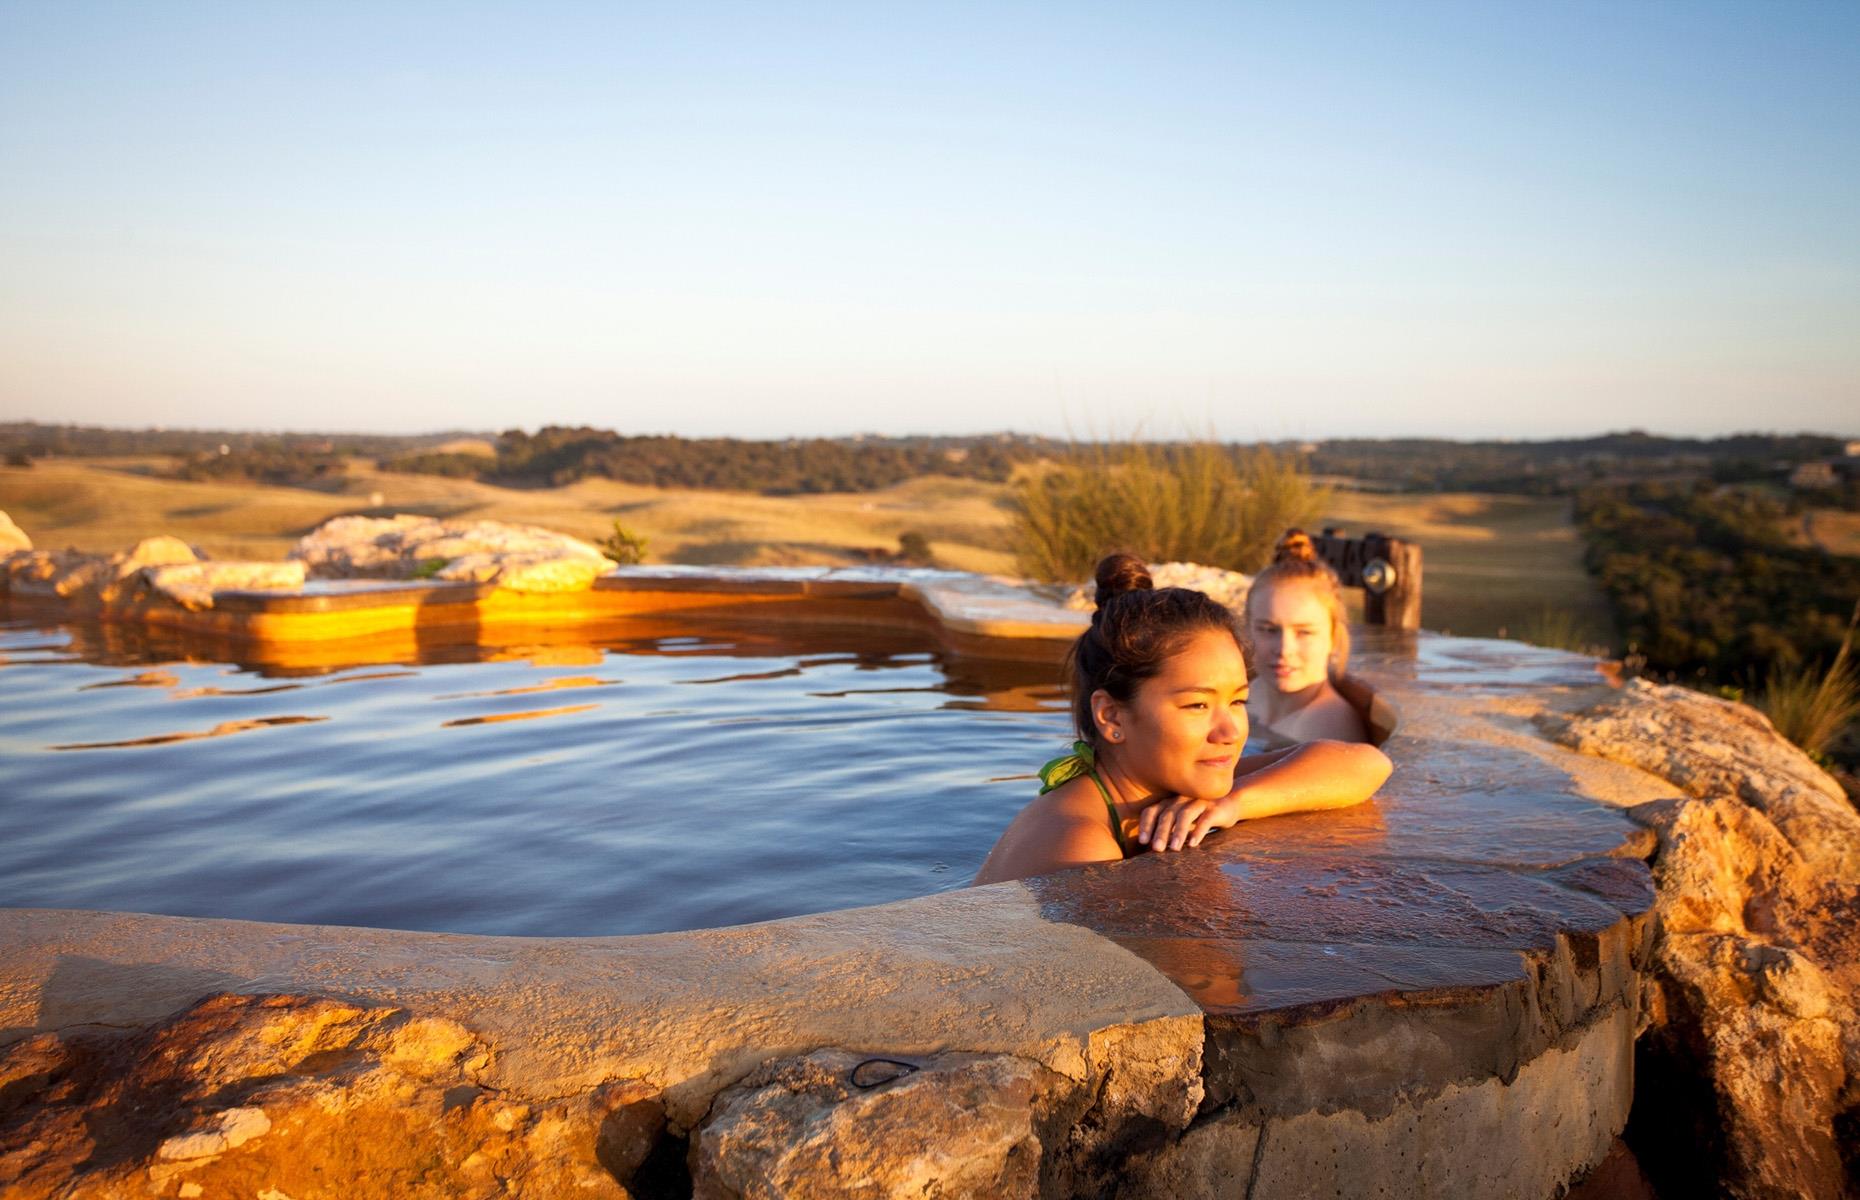 <p>In the late 20th century, two brothers drilled a borehole some 2,000 feet (610m) into Australia's Mornington Peninsula in a bid to access the geothermal waters deep below the surface. They succeeded, and today the waters flow through a series of tastefully built pools, including a hilltop bath with 360 degree views, a grotto pool and an indoor pool with lake views. There’s also a traditional sauna and Moroccan hammam. You’ll find Peninsula Hot Springs 90 minutes from Melbourne.</p>